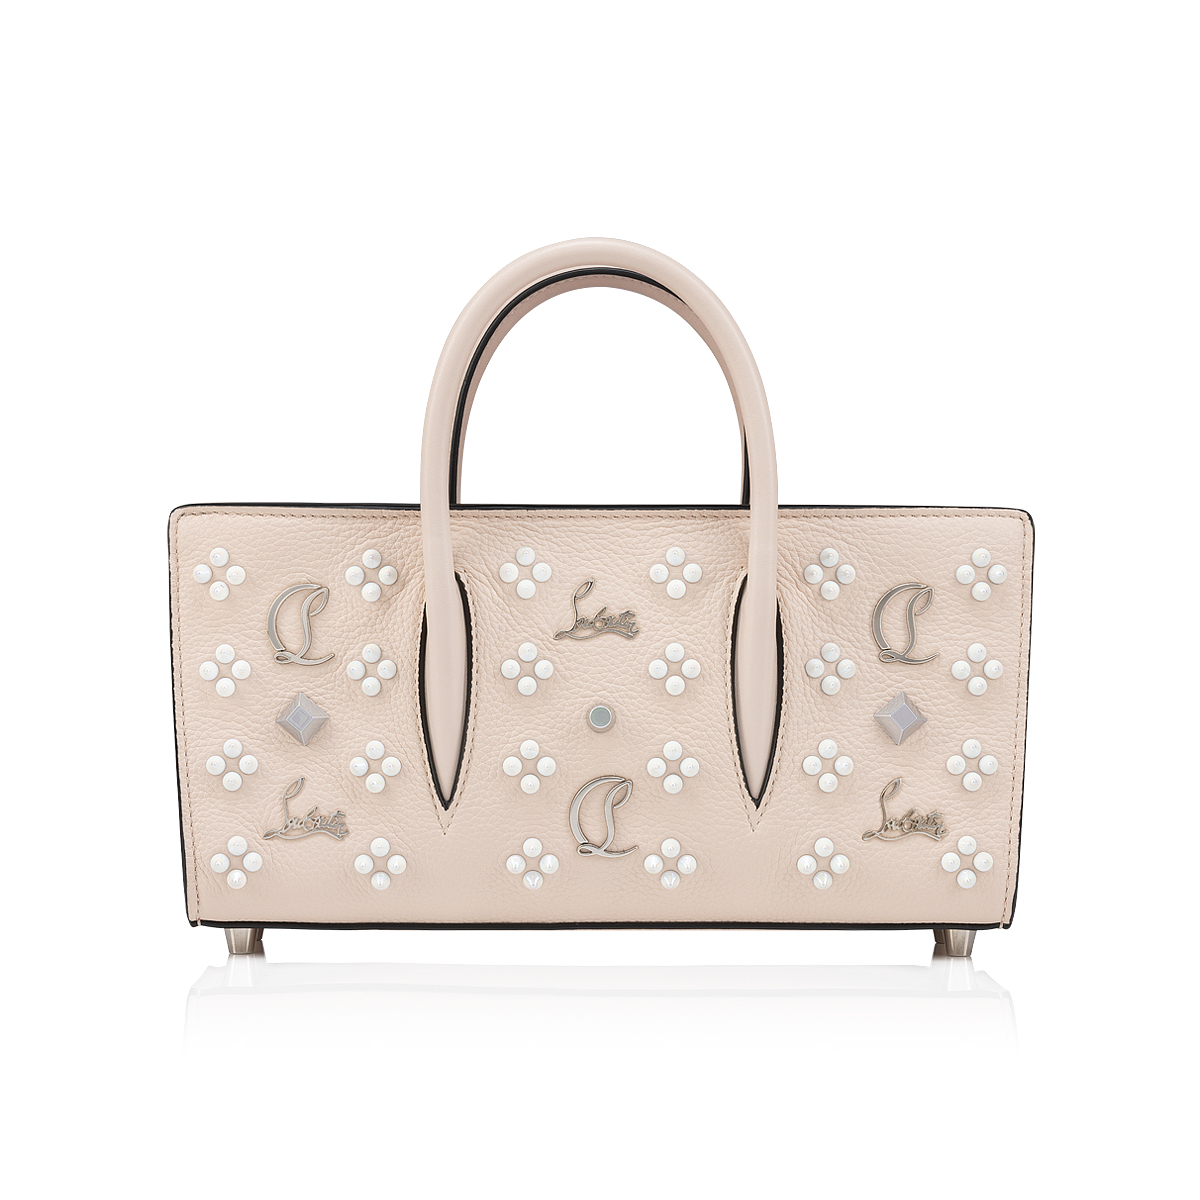 Paloma medium - Top handle bag - Grained calf leather and spikes